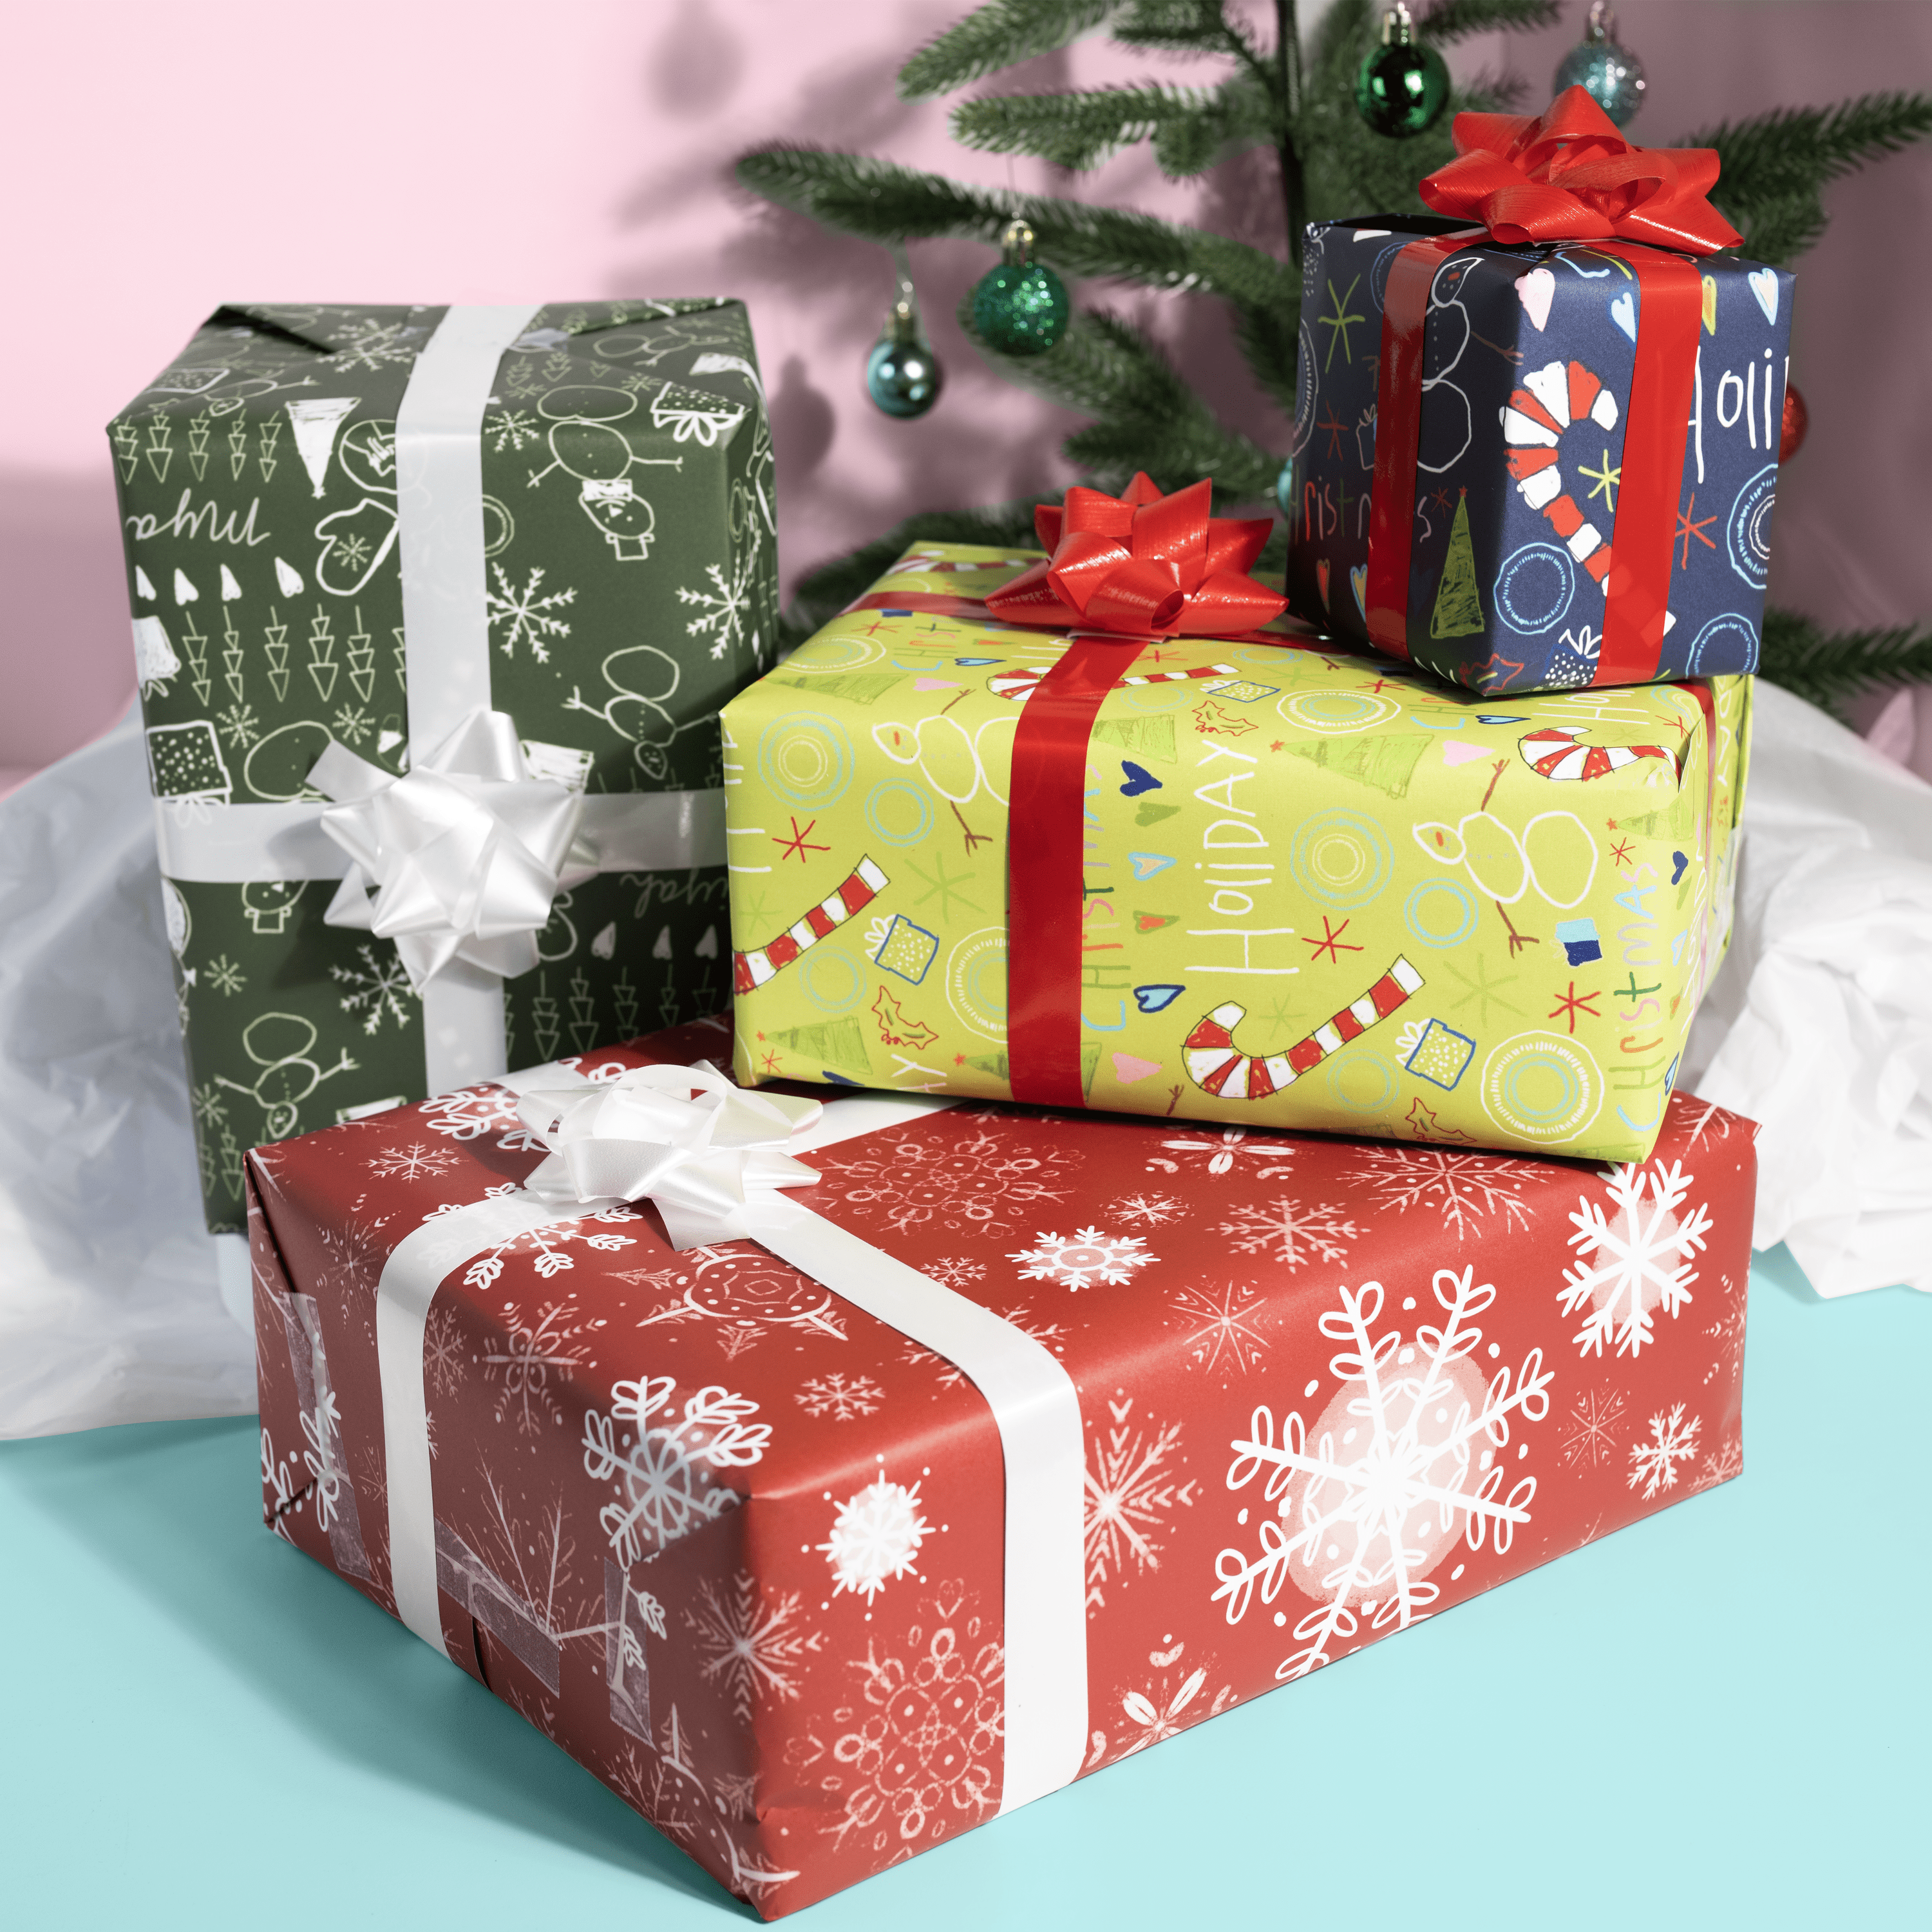 Uniquely Designed Holiday Wrapping Paper-Set 2